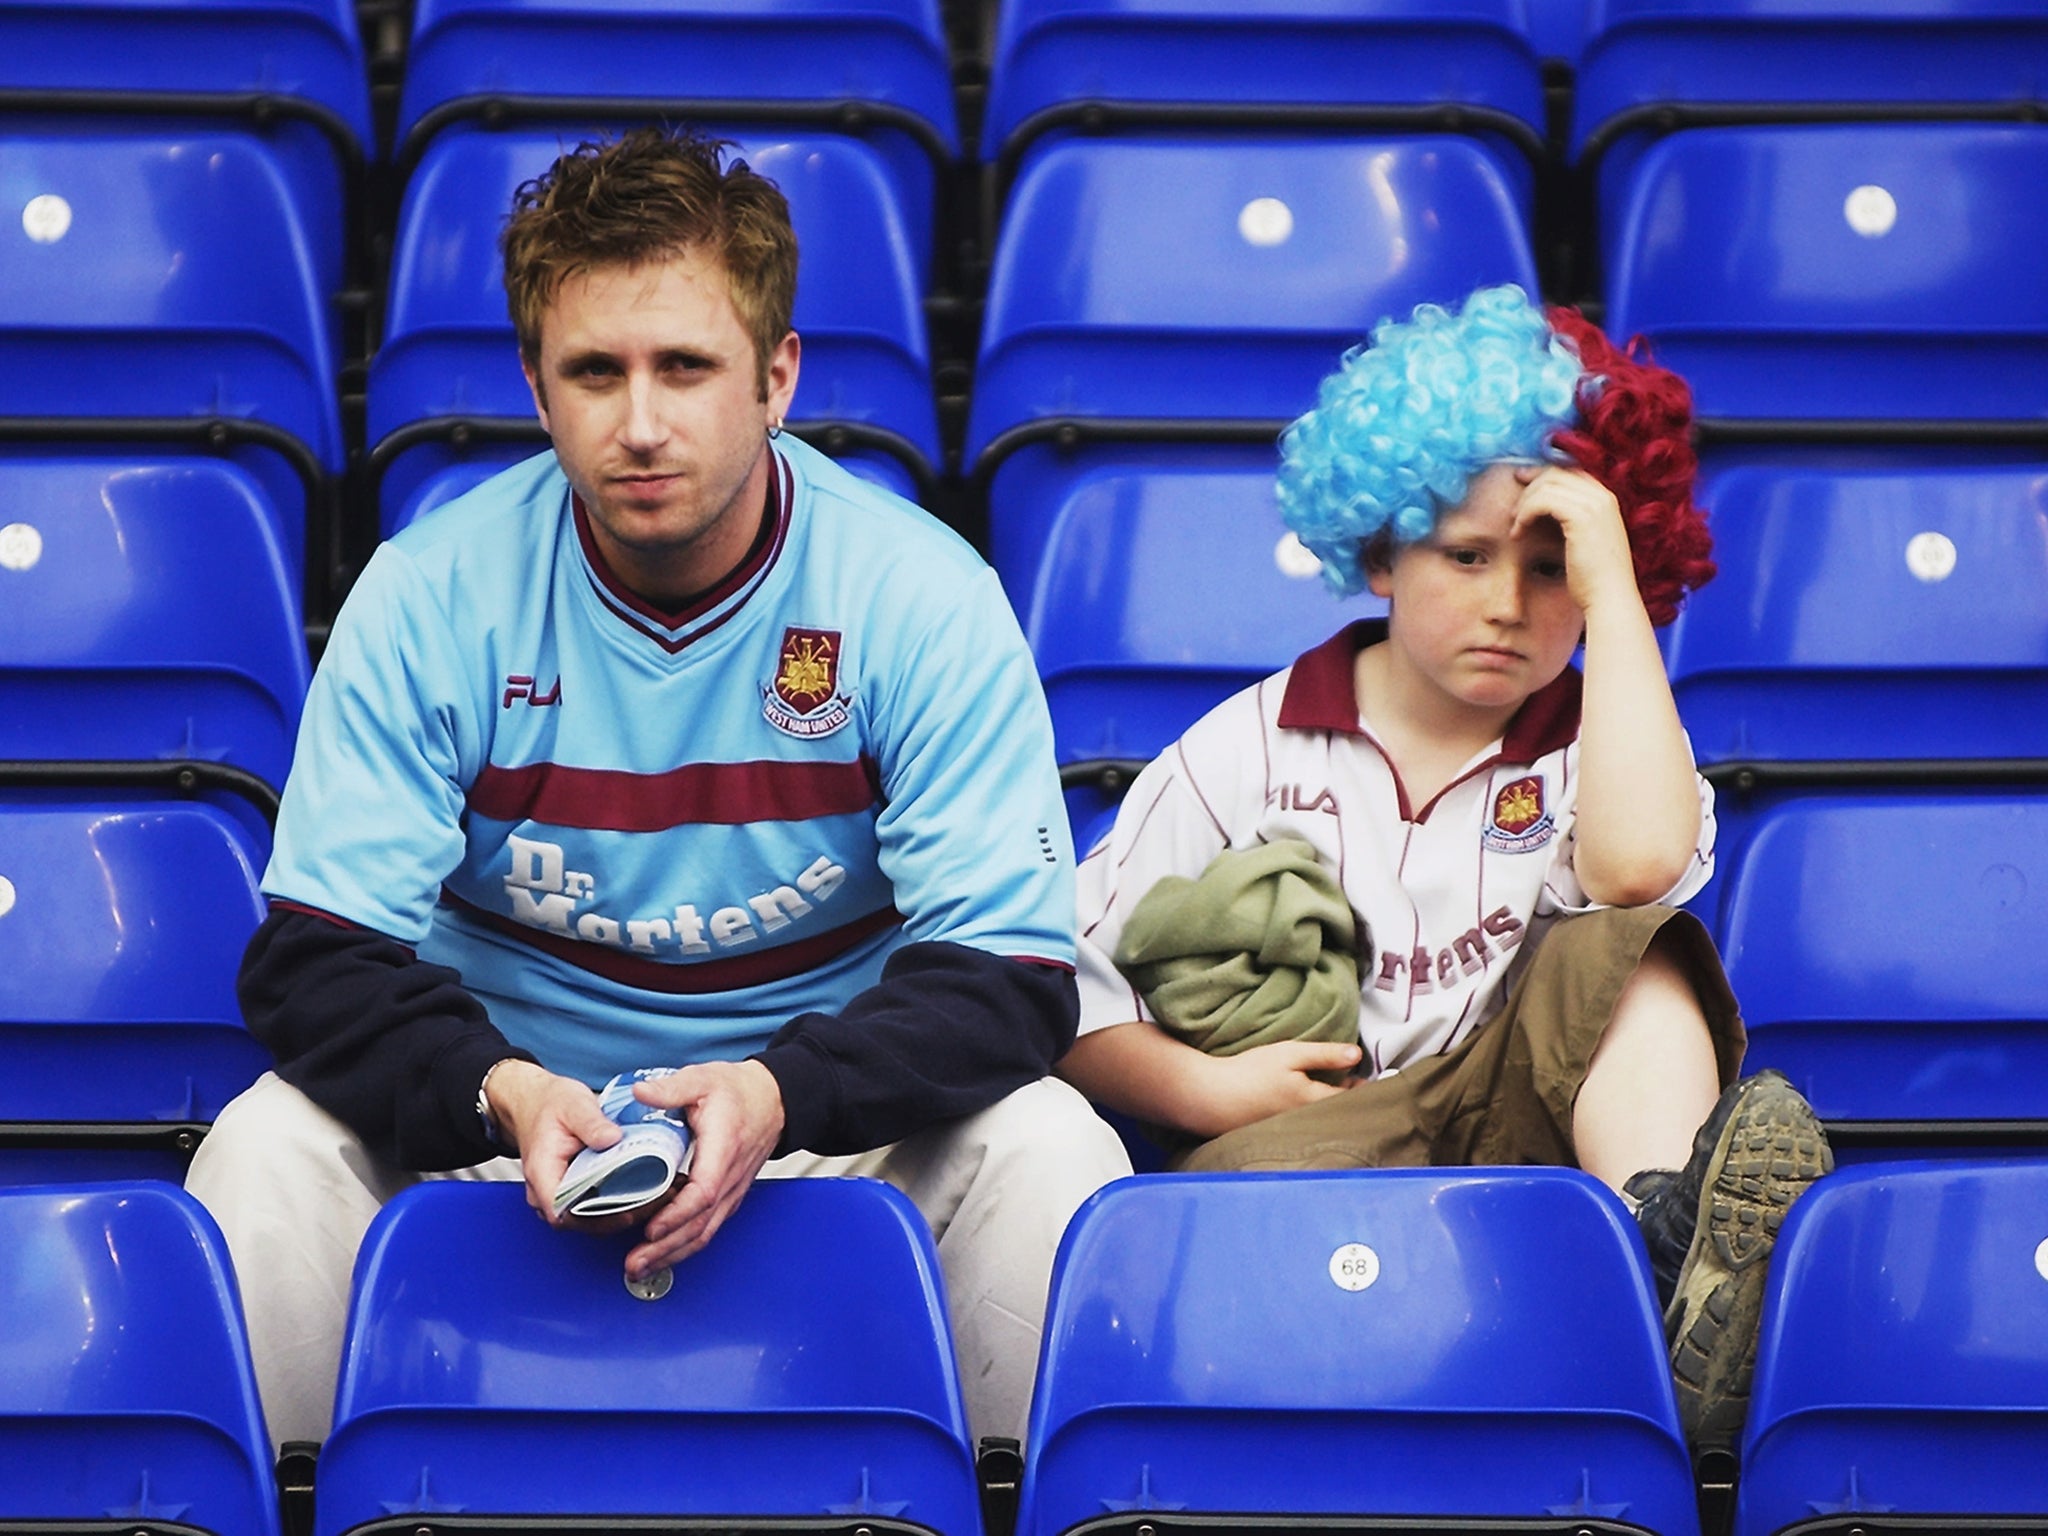 West Ham fans are truly disappointed after their team lose 5-0 to Man City